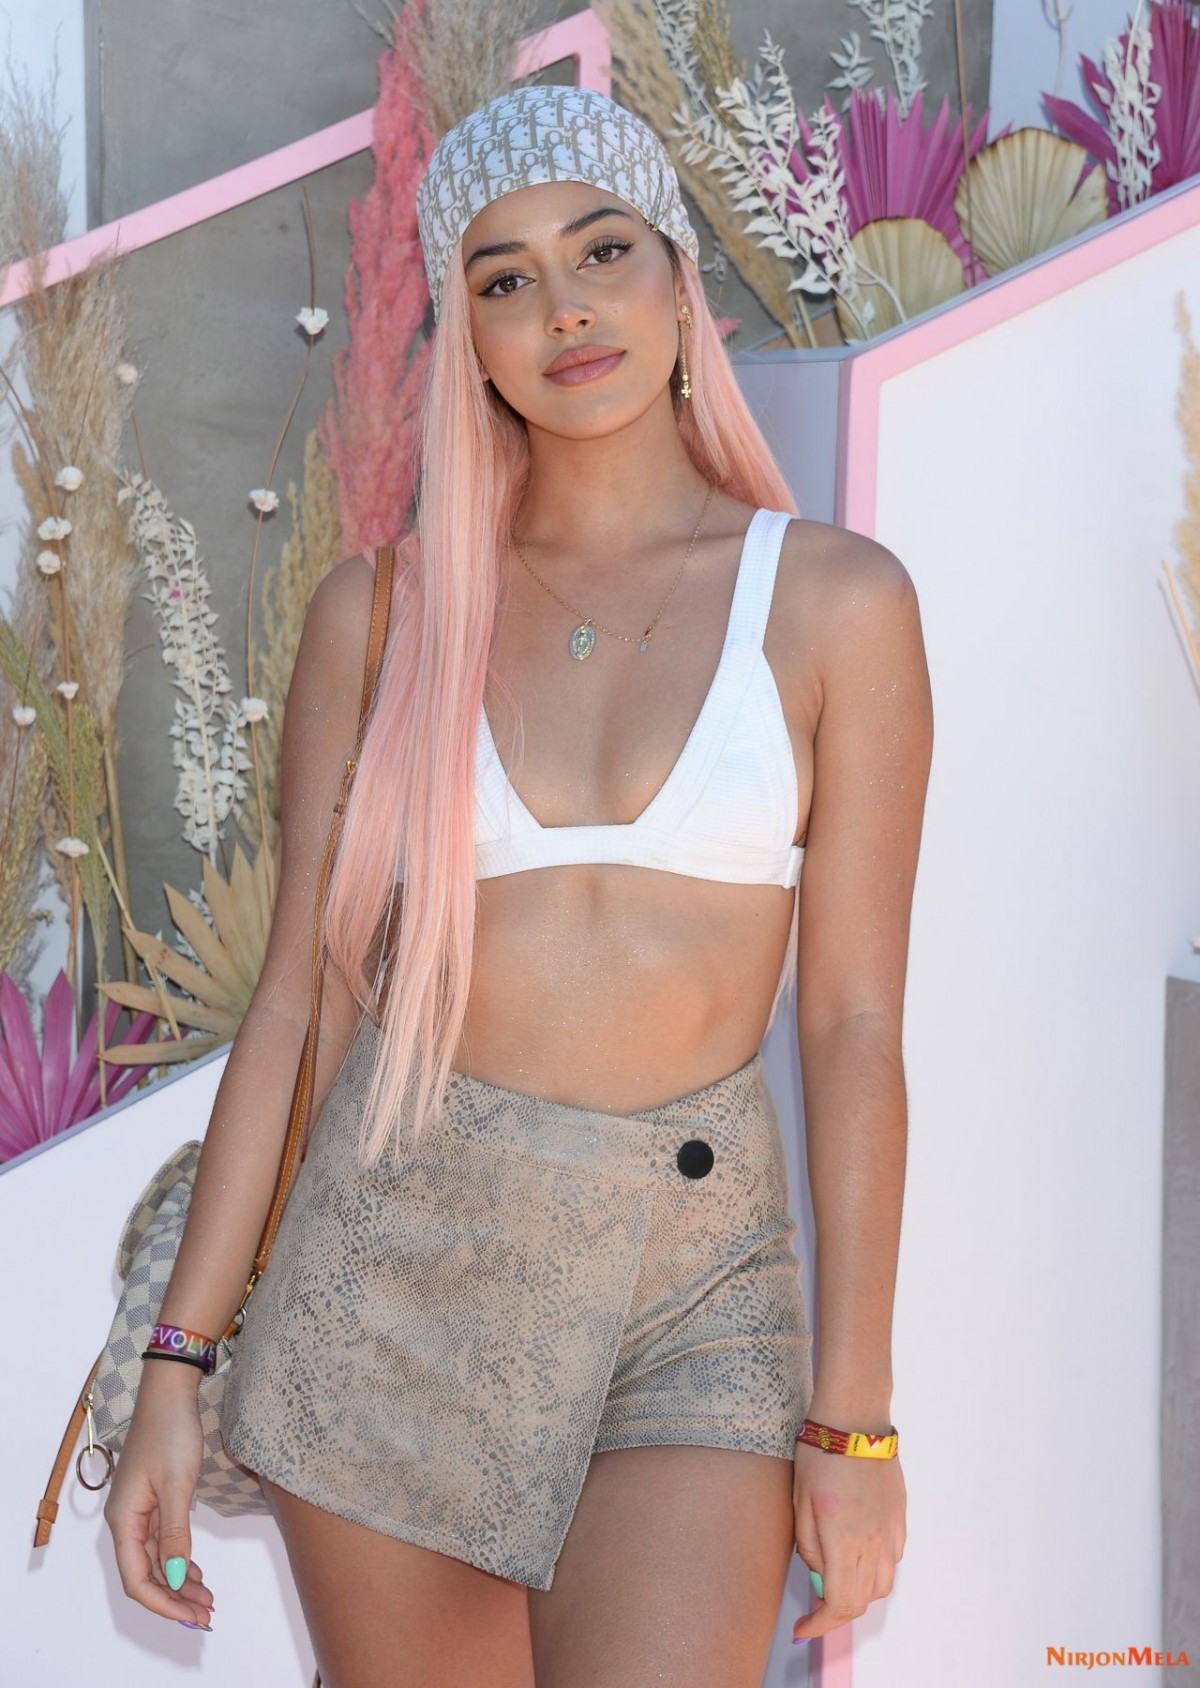 cindy-kimberly-revolve-party-at-coachella-in-indio-04-13-2019-5.jpg